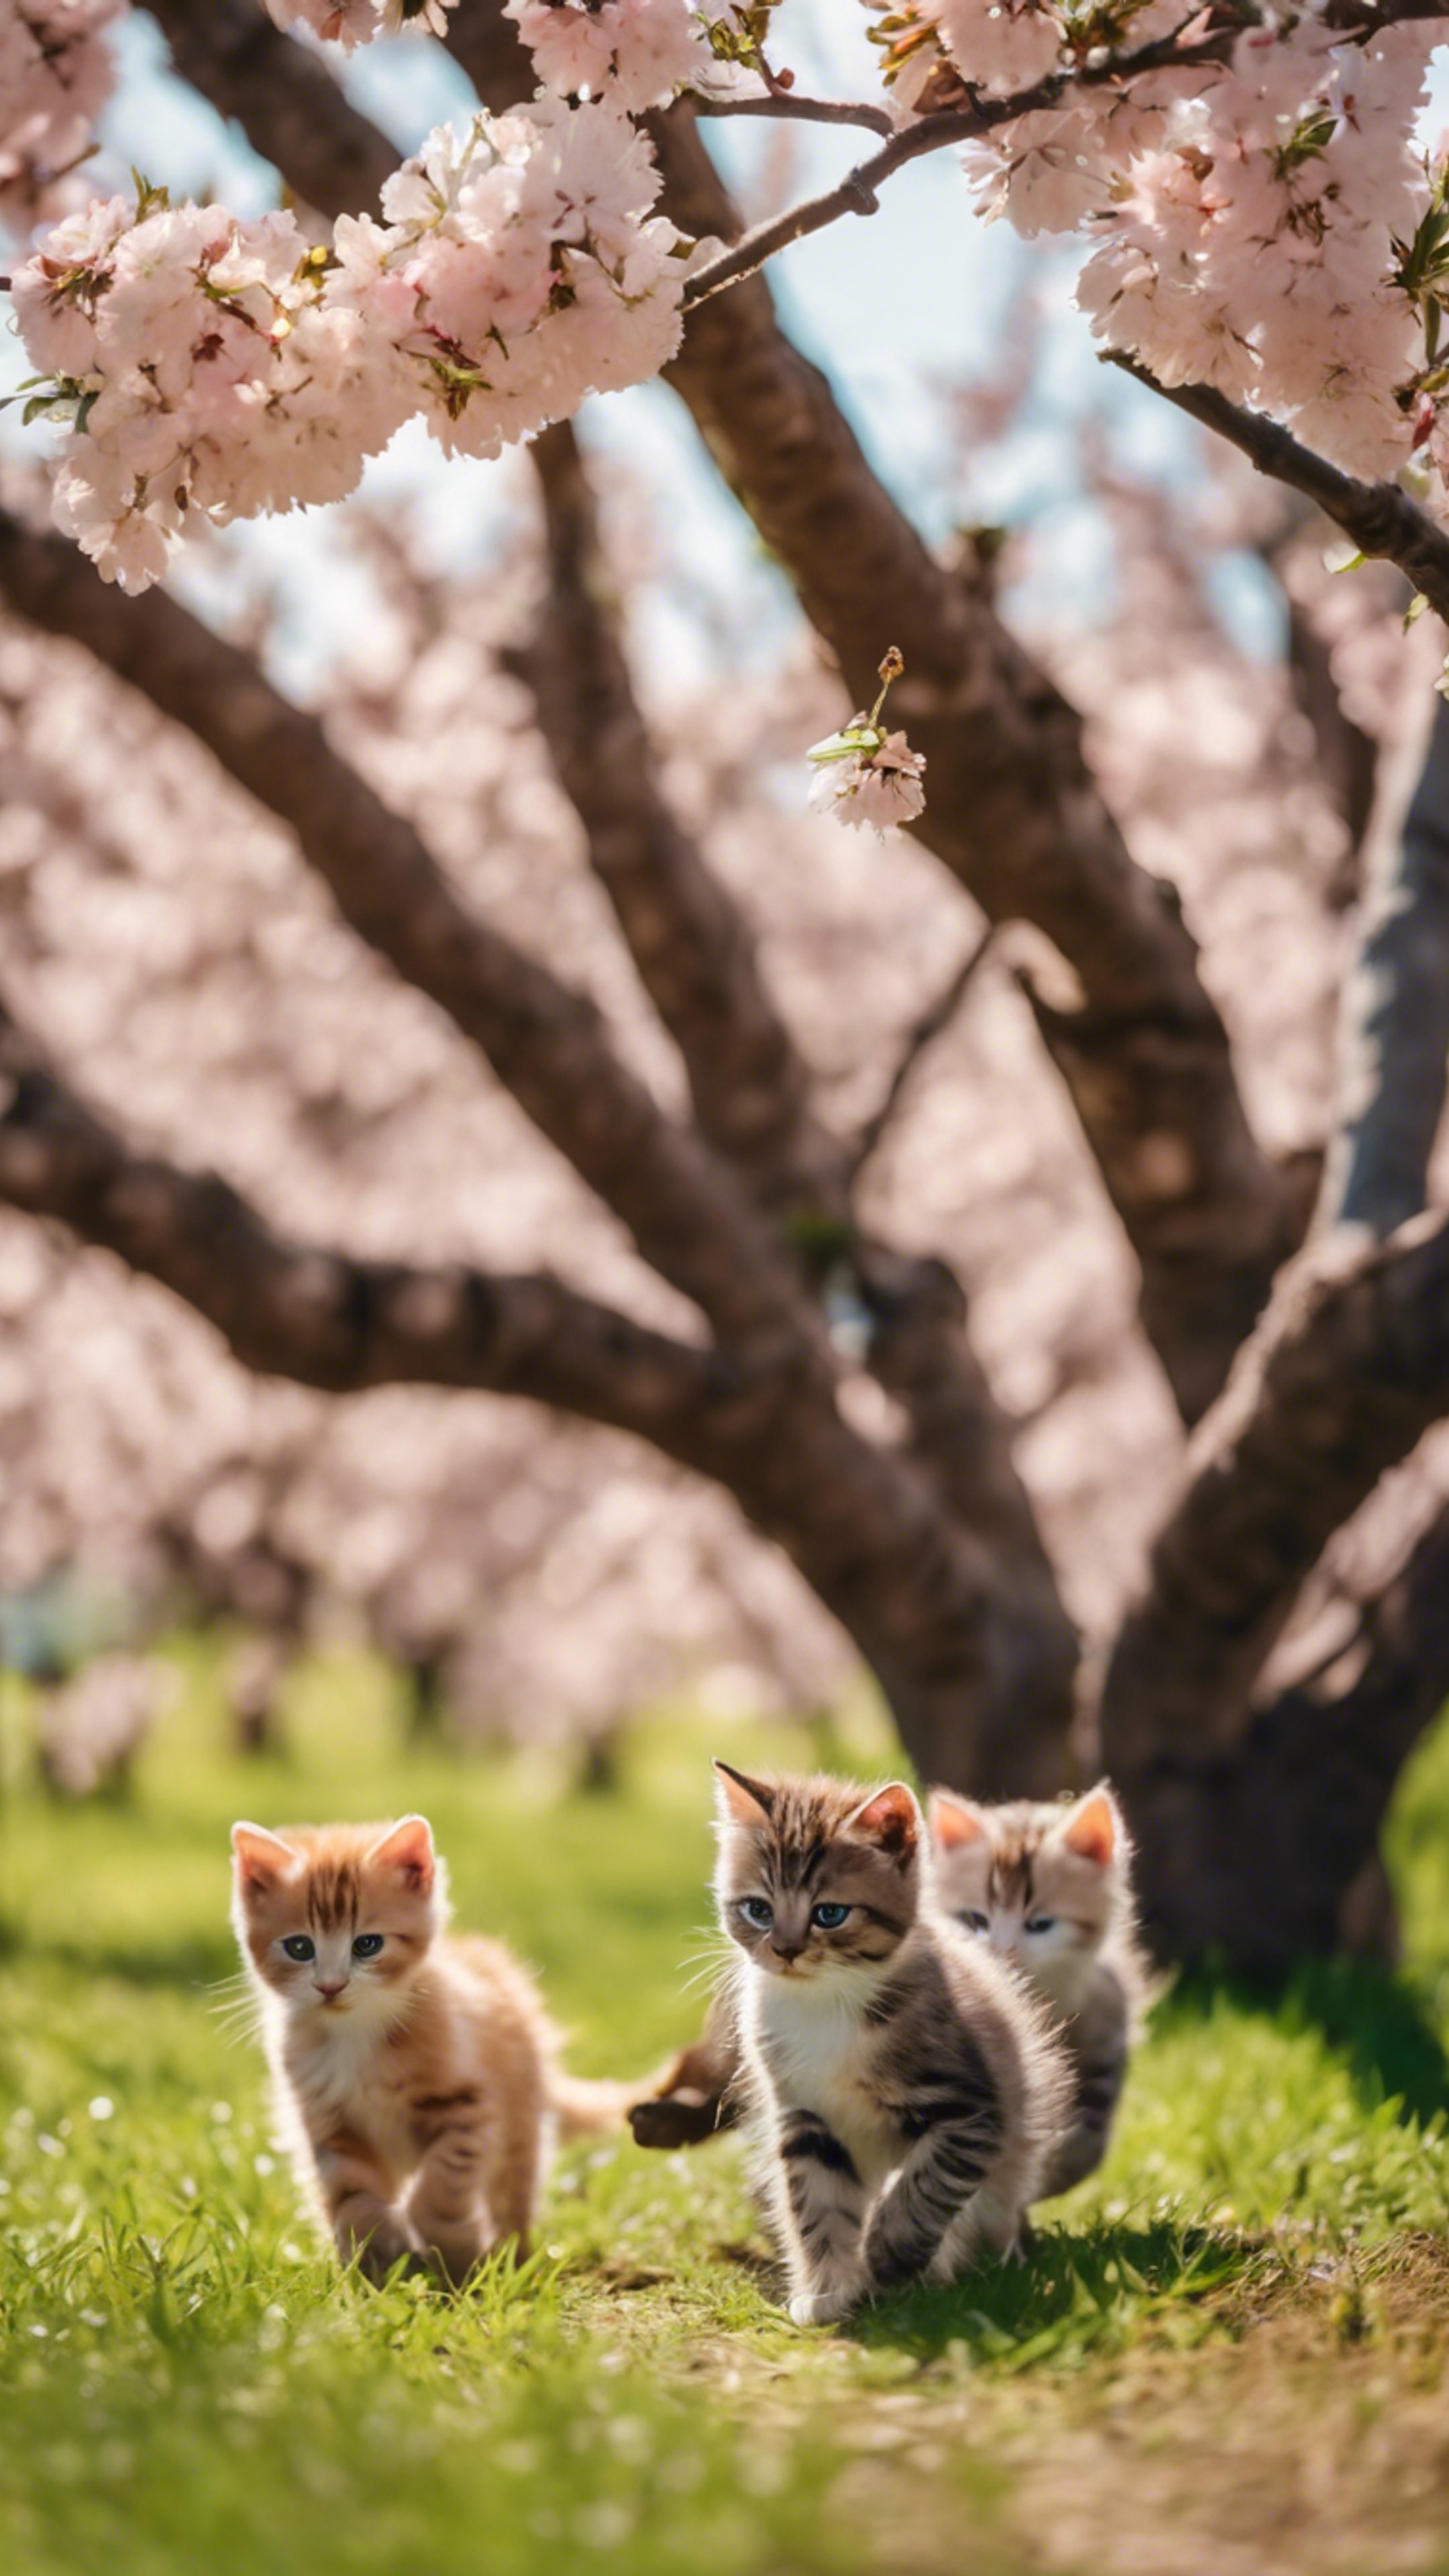 A group of multi-colored kittens chasing their shadows under a peach tree during a beautiful spring afternoon. Tapeta[1b8583aedfab46758668]